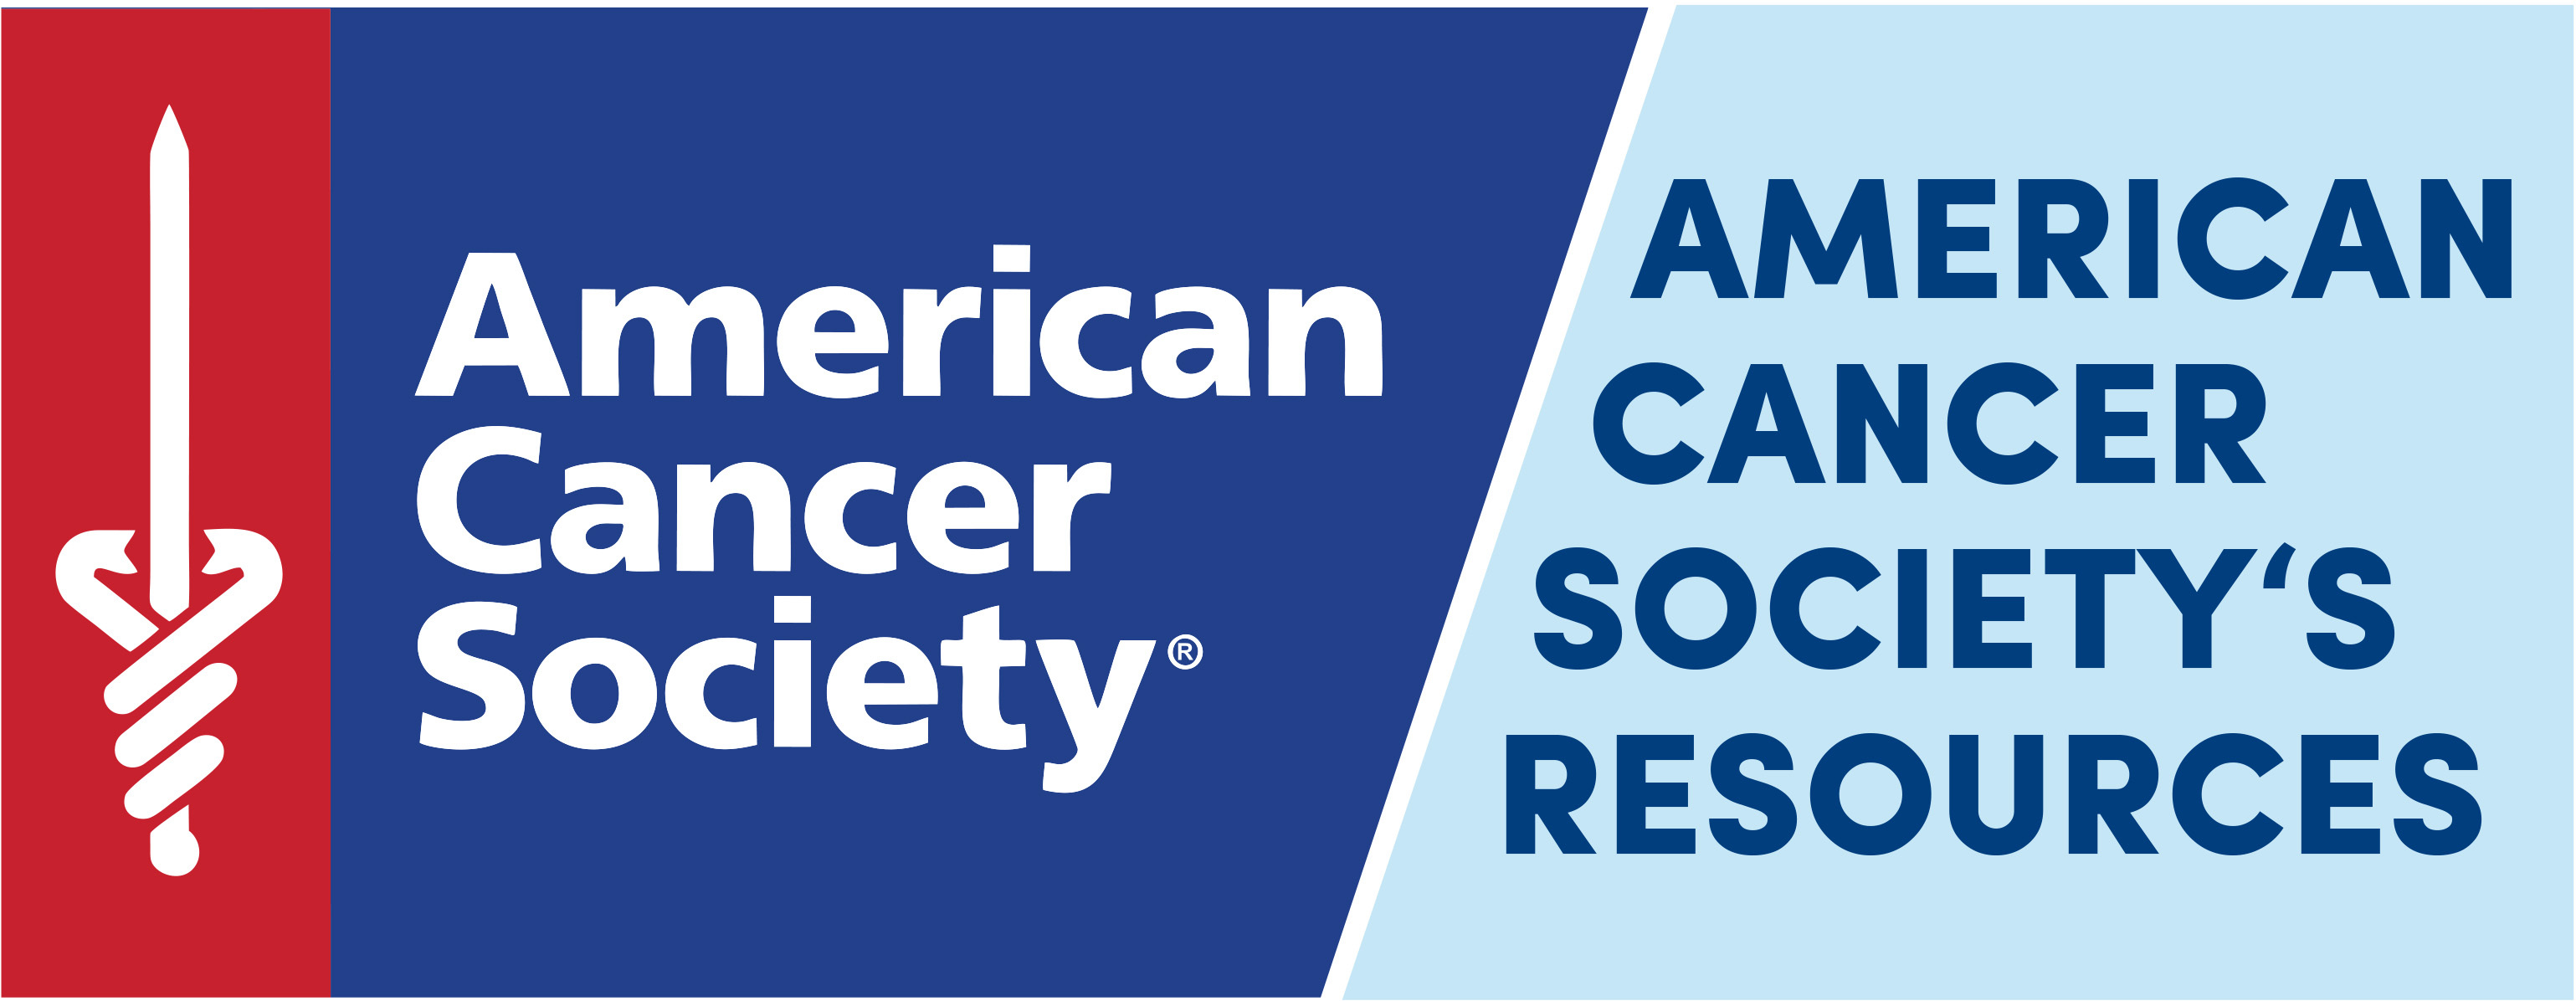 American Cancer Society's Resources